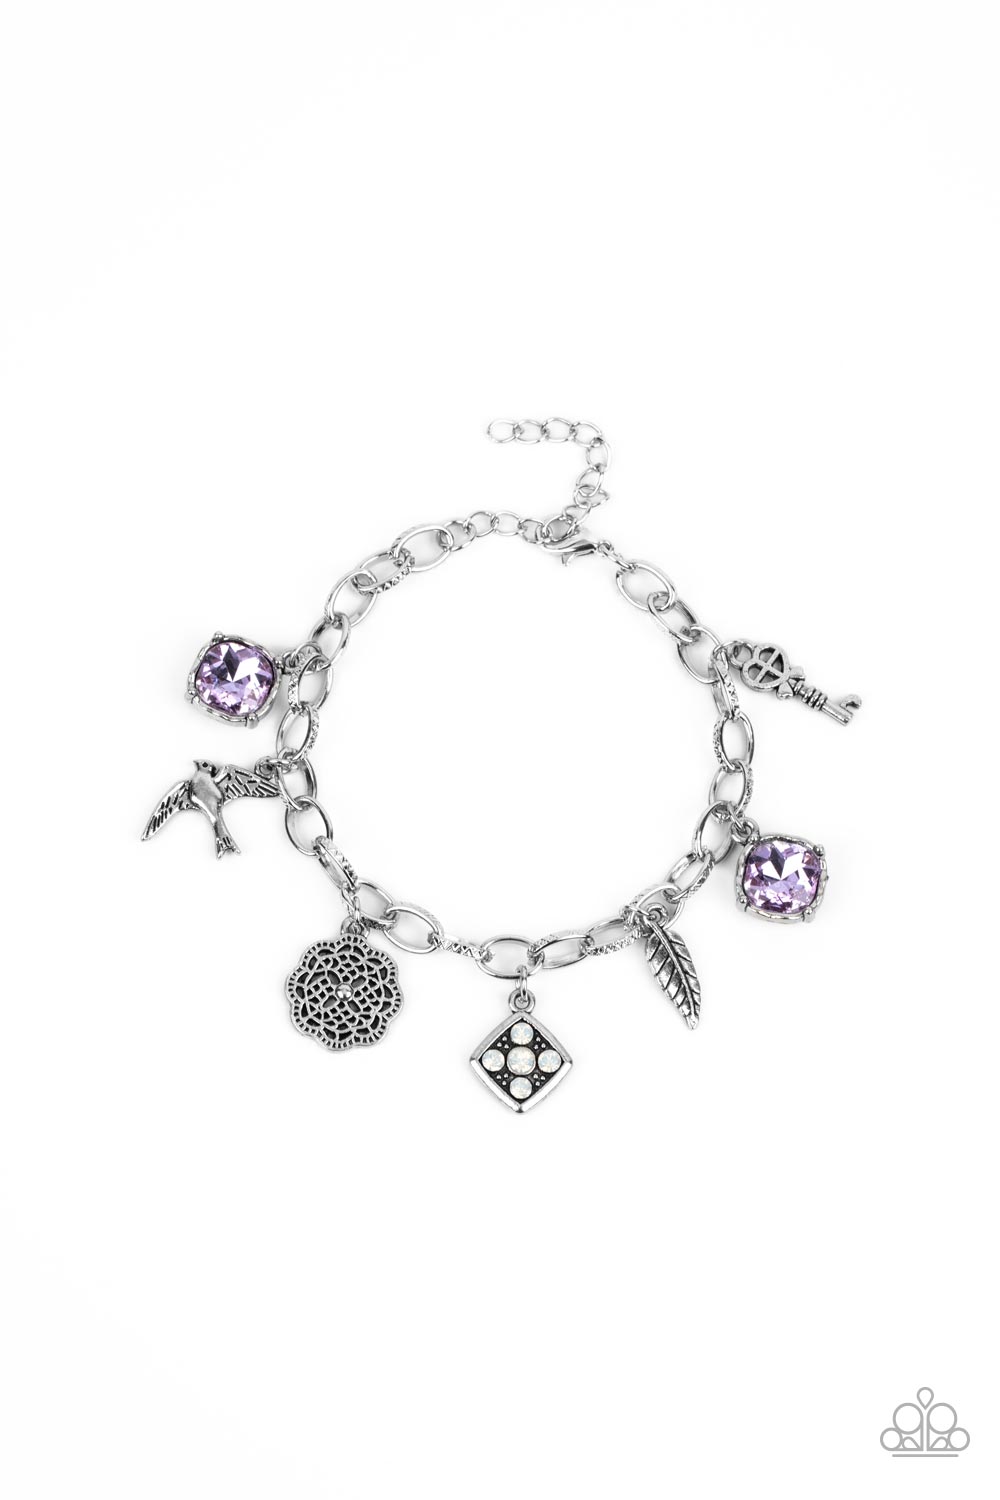 Fancifully Flighty - Purple Gem - Silver Charm Bracelet - Paparazzi Accessories - Sparkling purple gems, a floral medallion, a bird in flight, and a fluttering feather dangle from a delicate silver chain as they coalesce into a whimsical charm bracelet. Features an adjustable clasp closure. Sold as one fashion charm bracelet.